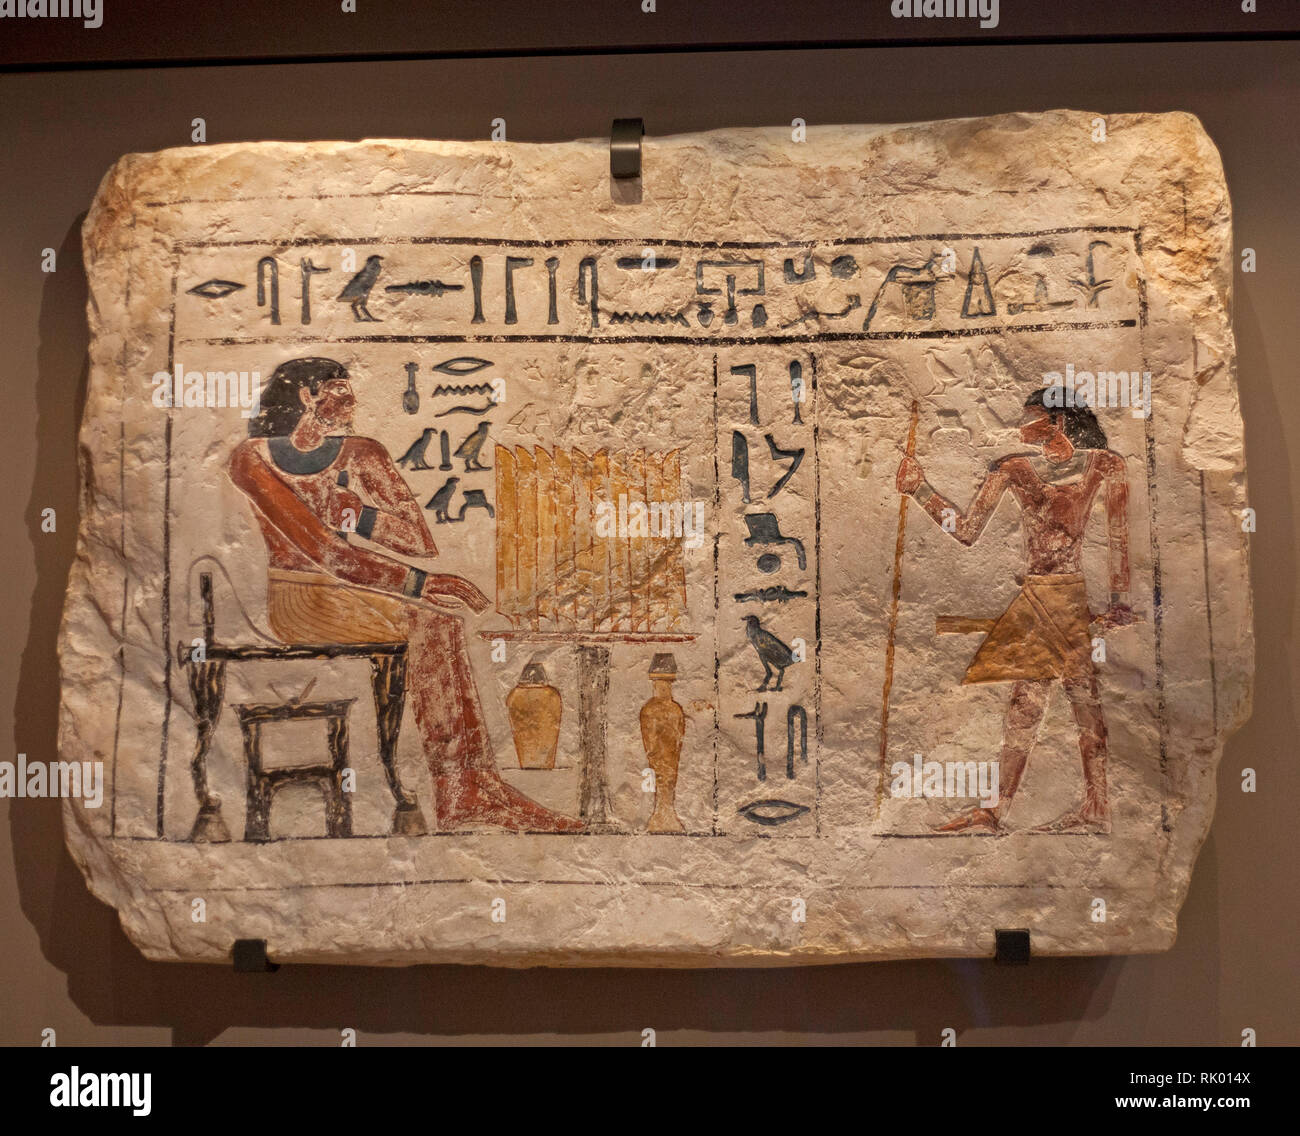 Edinburgh, Scotland, UK, 8th February 2019, after completion of a £3.6 million project backed by nearly 500 different donors National Museum of Scotland opens new Egyptian and east Asian treasures showcase as 1300 objects go on public display, 40 per cent will be displayed for the first time in a generation. Tomb Chapel Relief Fragment Aakseneb Stock Photo